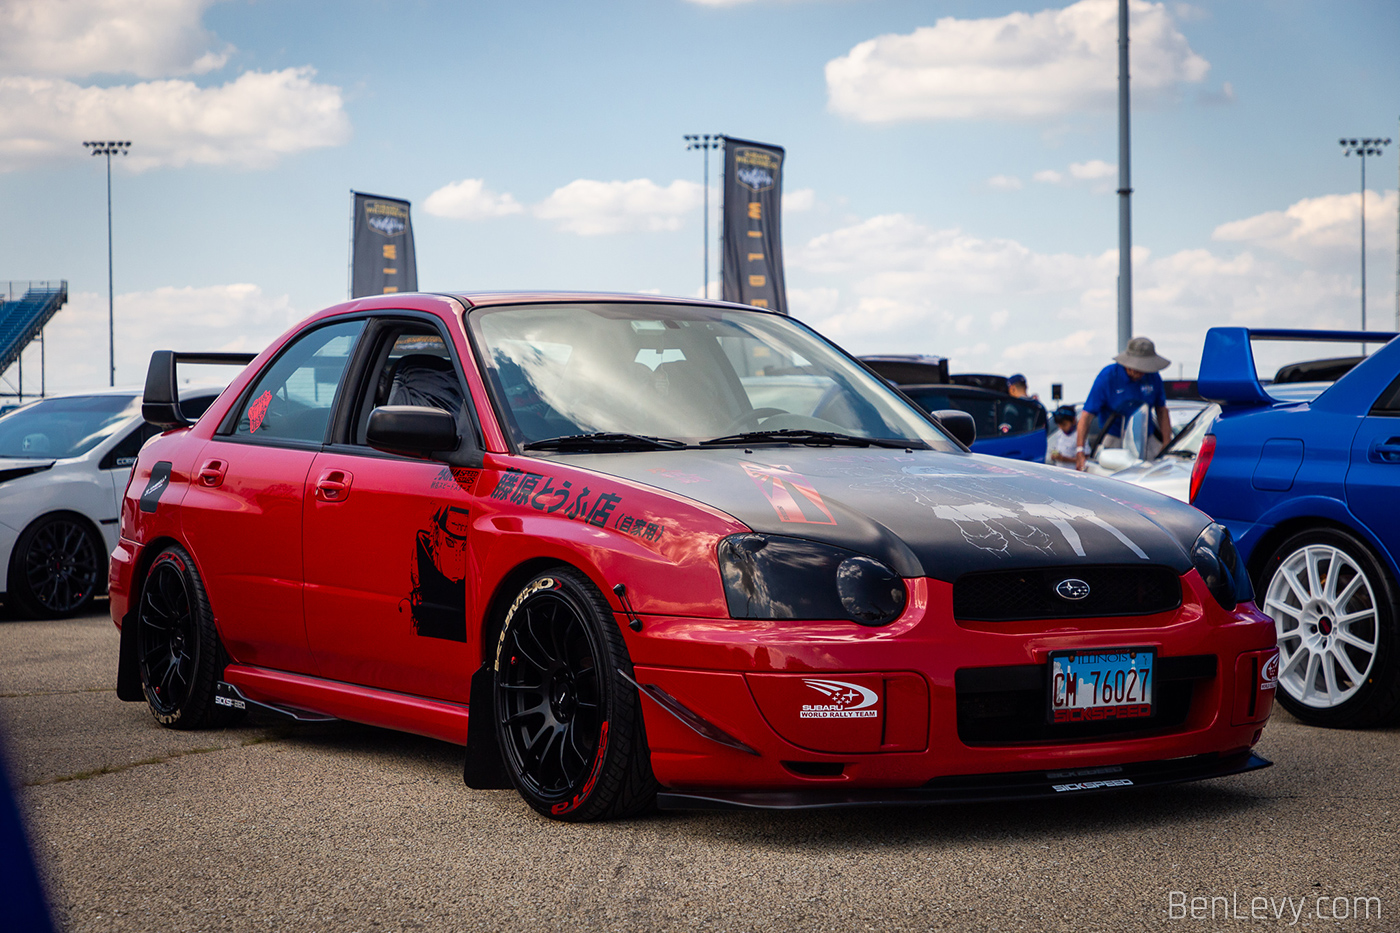 Red Subaru Impreza at Subiefest Midwest